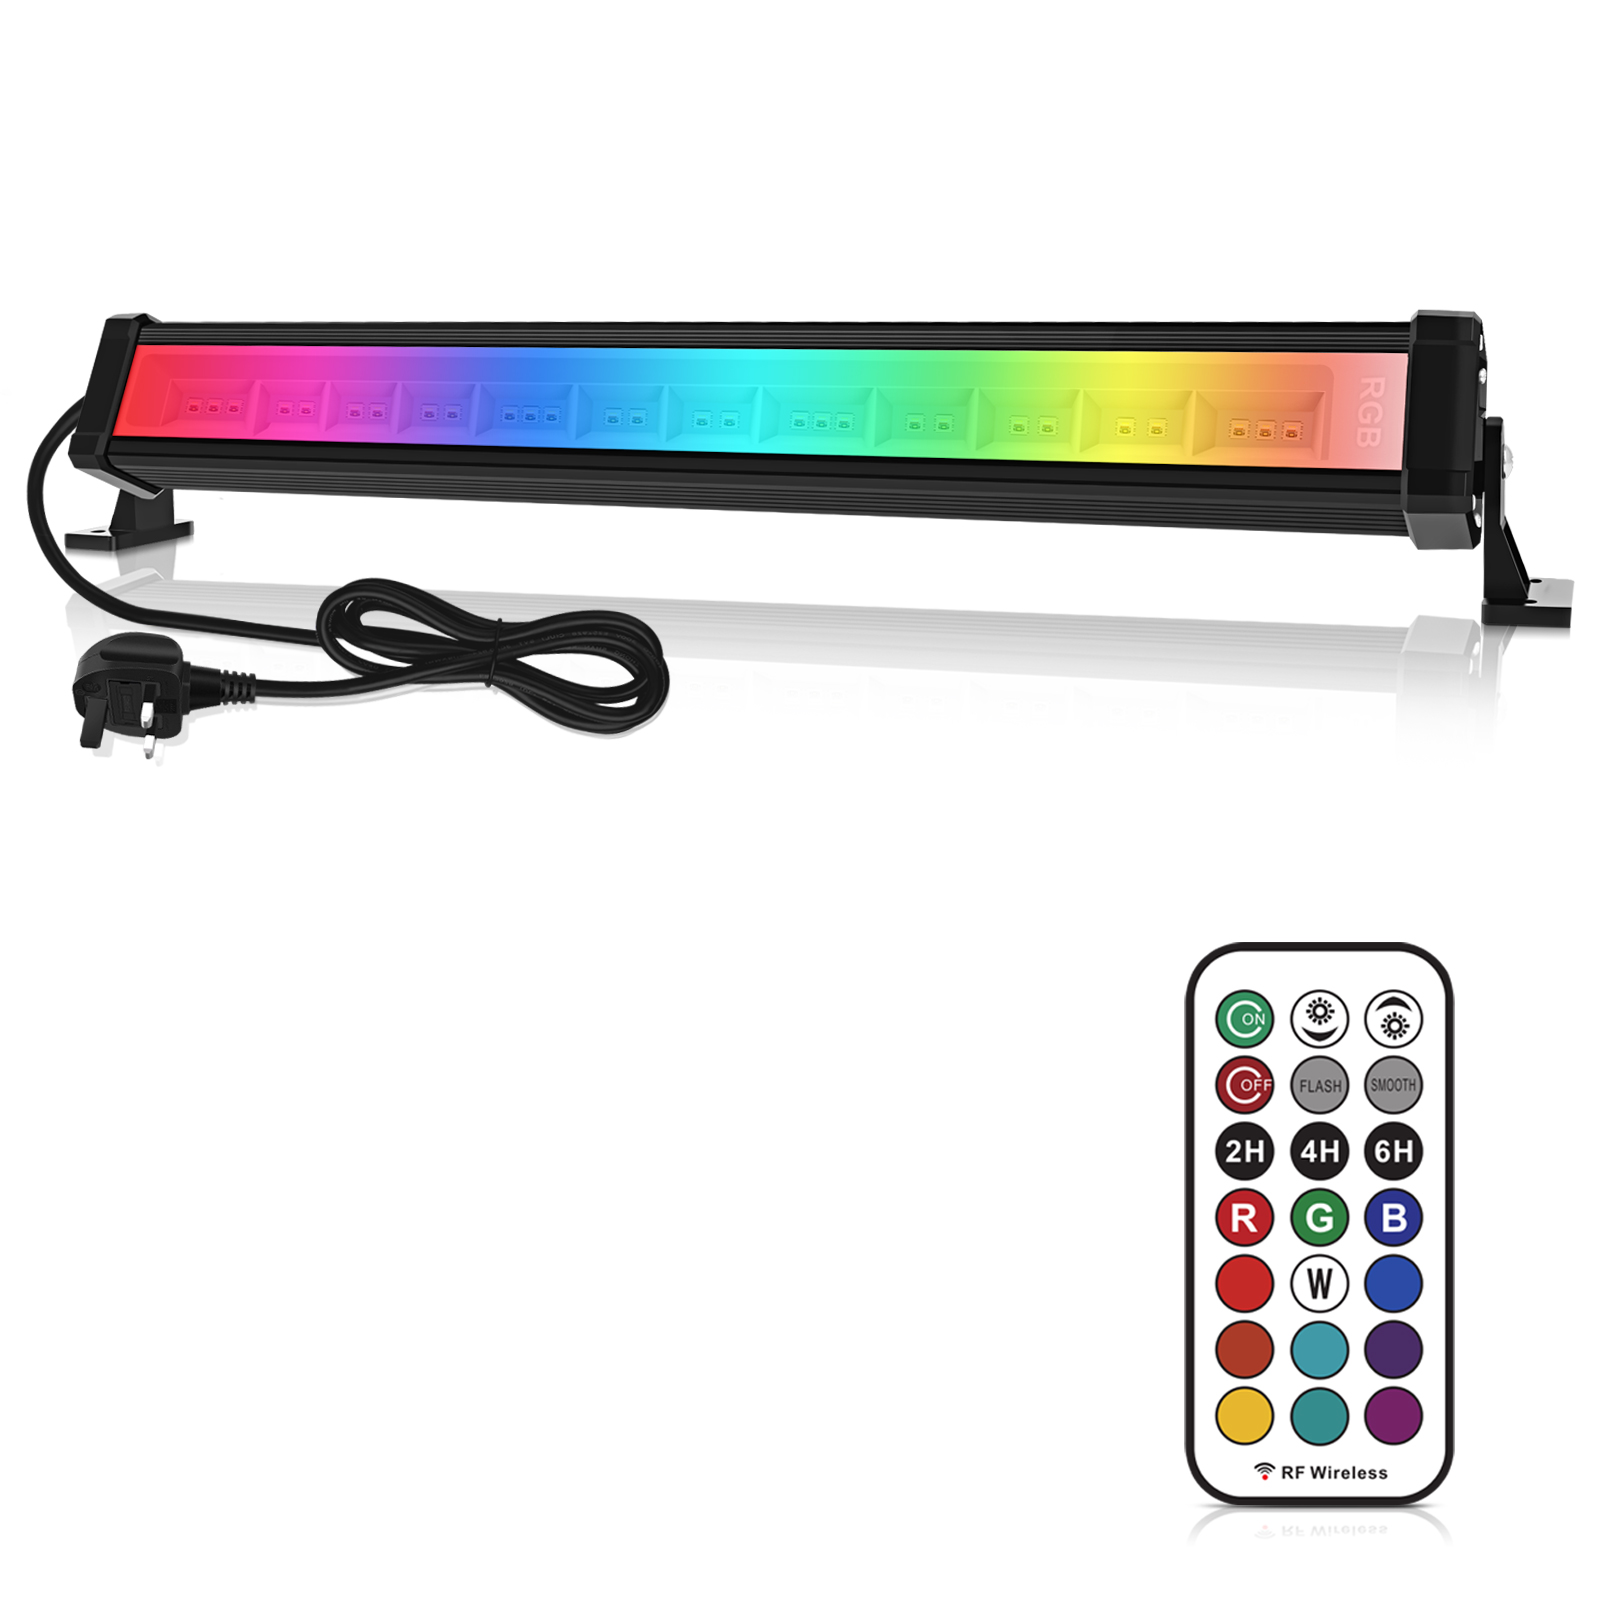 RGB Light Bar Linke 42W Led Wall Washer Light Disco Lights 3350LM Extremely Bright Adjustable Remote Control RGB Lights for Bar DJ Party Stage Garden BBQ Halloween Christmas Festival Decorative Light 2 Pack